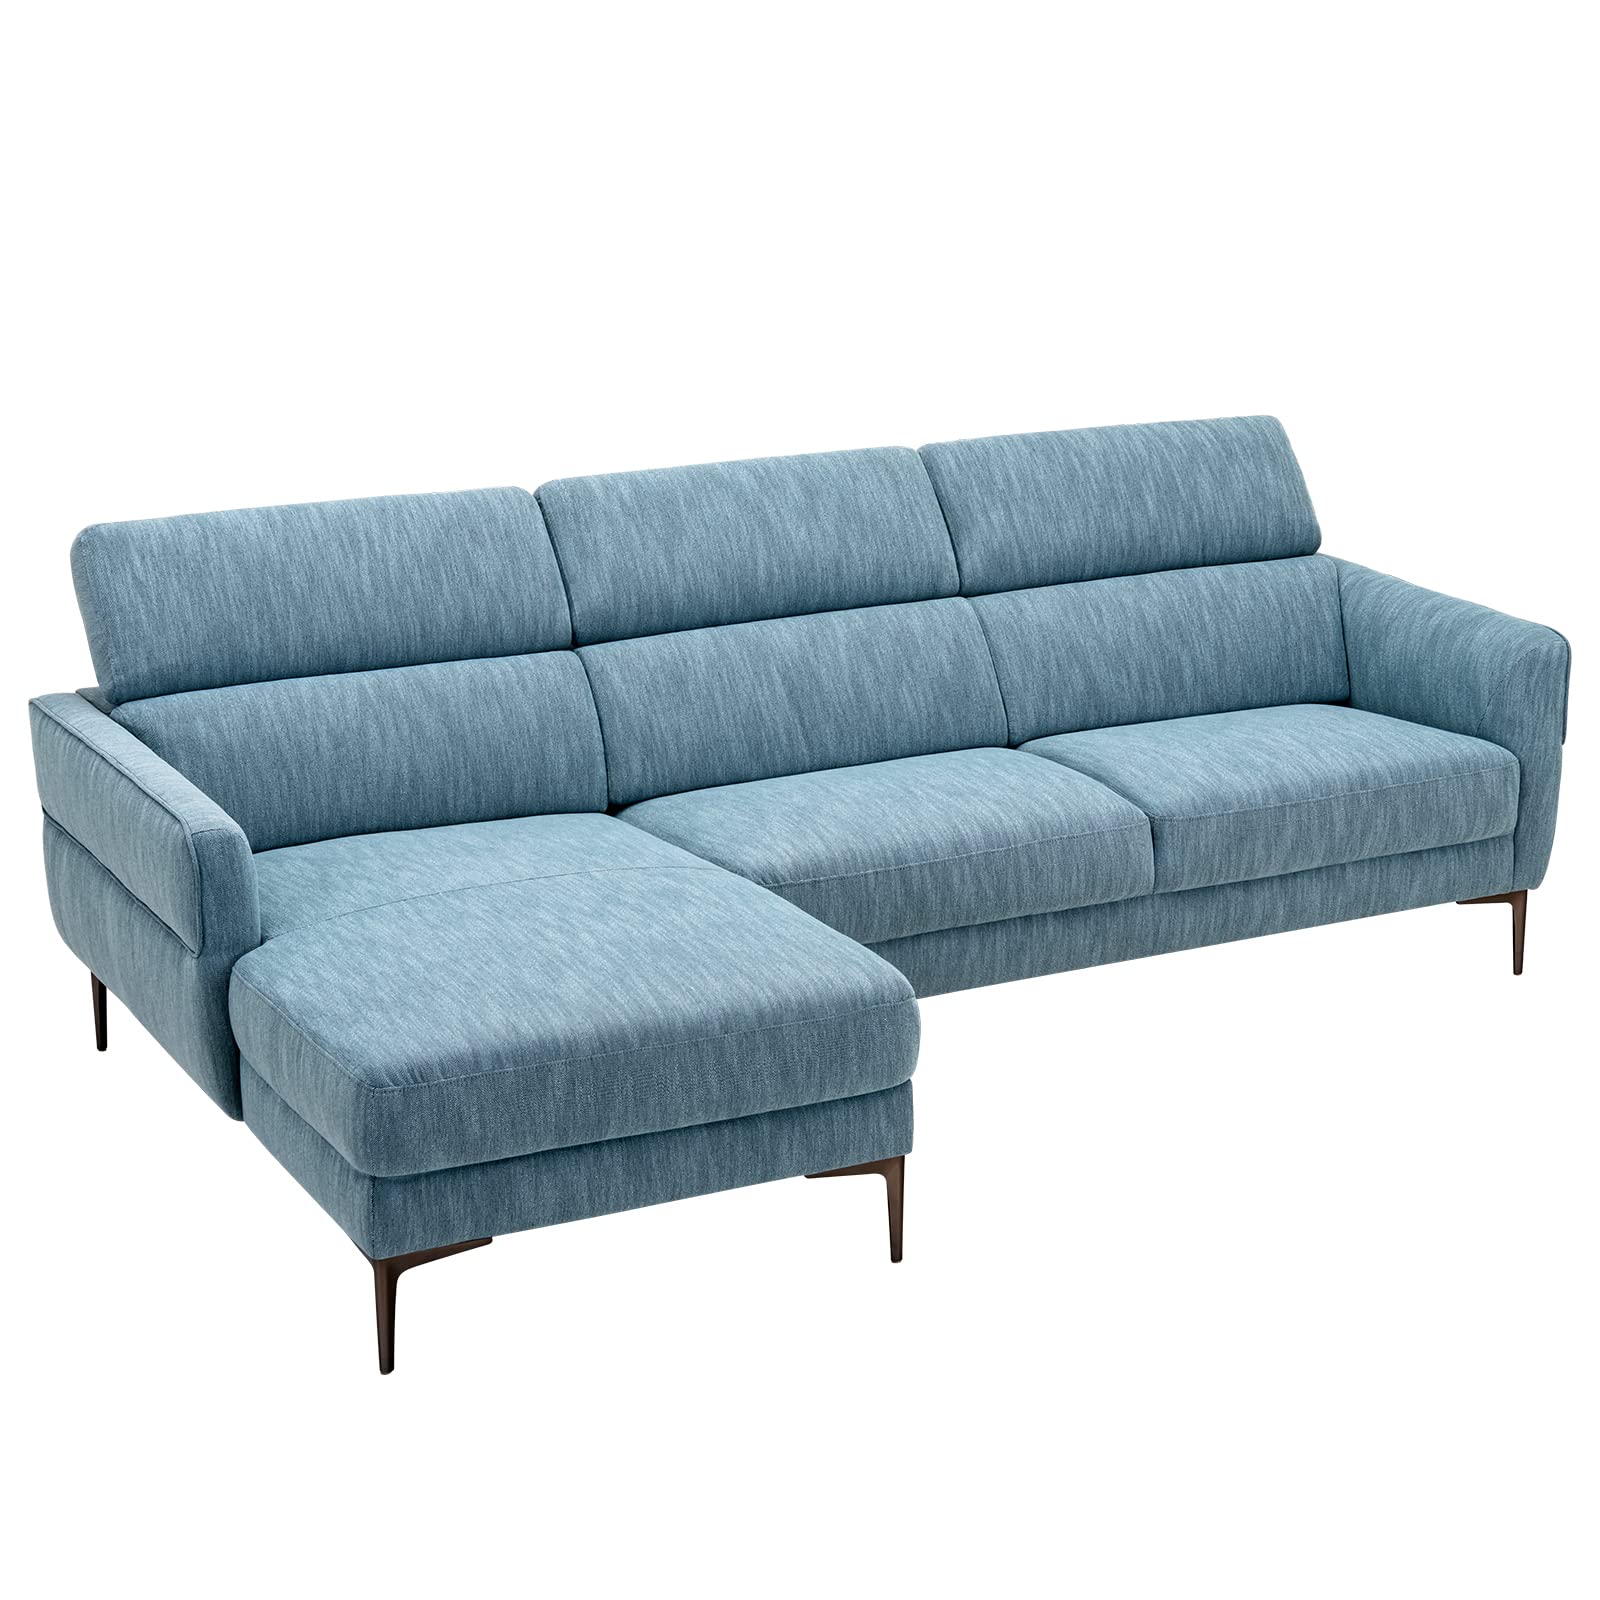 Giantex L-Shaped Sofa Couch, 3-Seat Upholstered Sofa with Wide Chaise Lounge, Adjustable Headrest, Blue